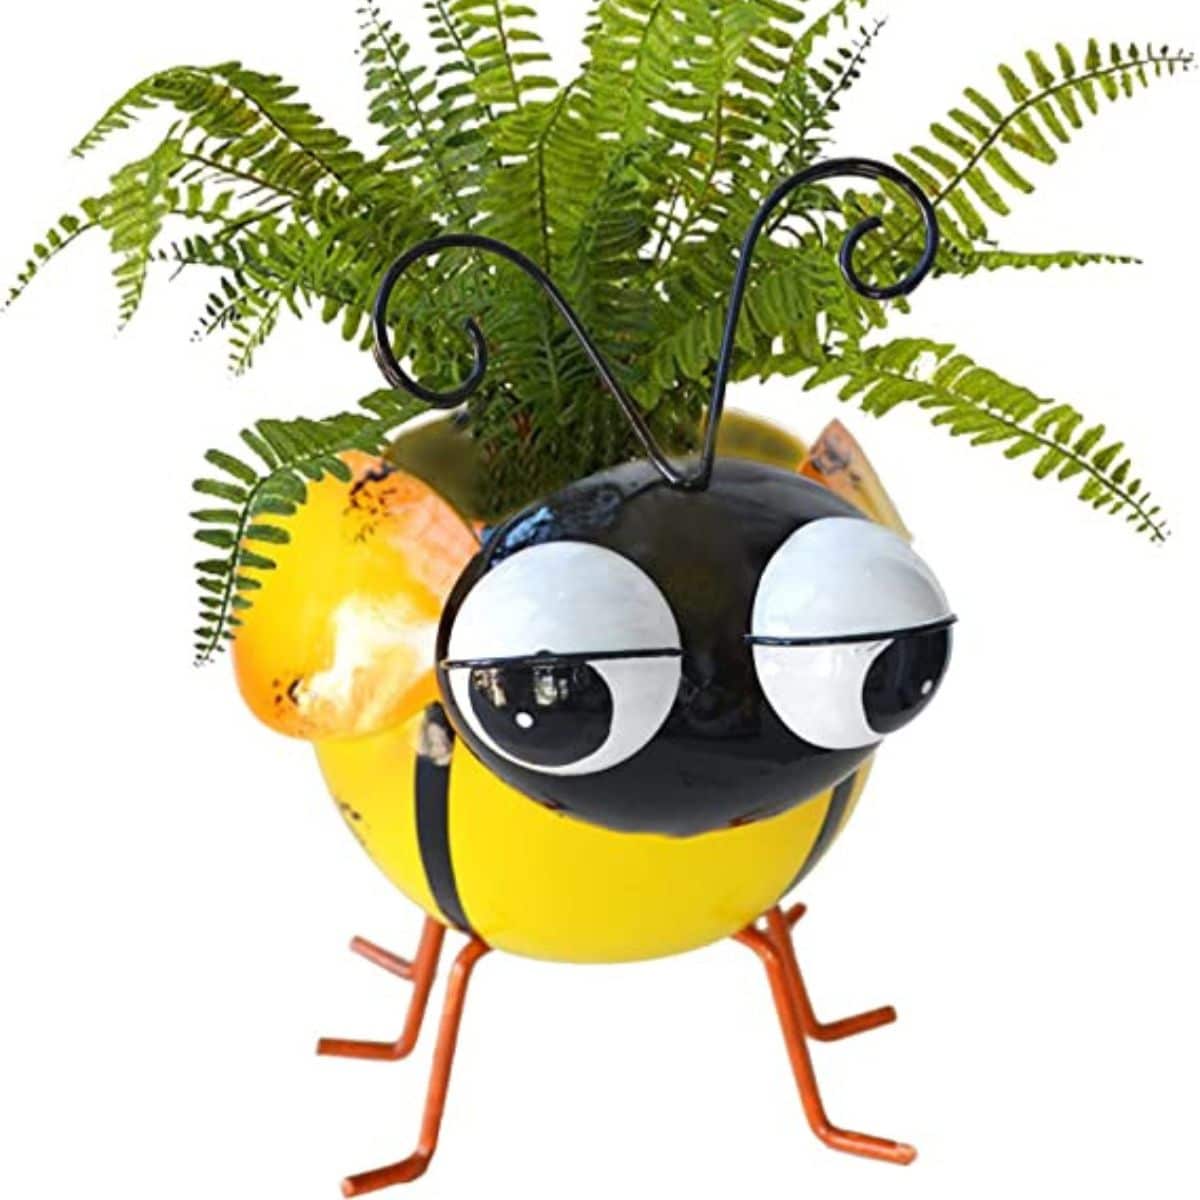 bumble bee metal plant container with indoor plant planted inside from amazon